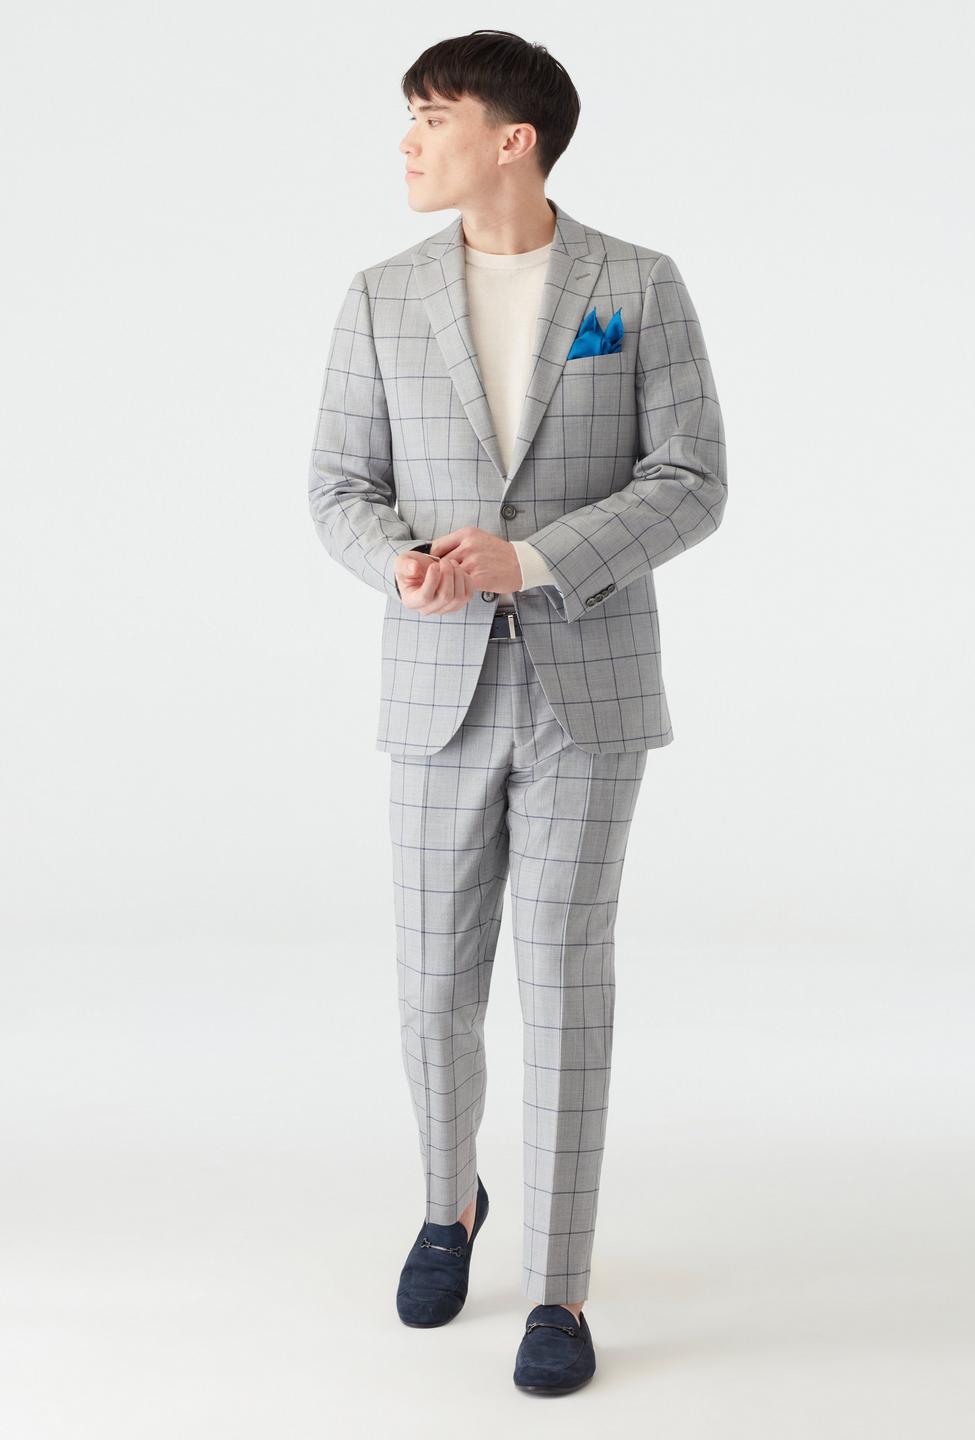 Keyford Windowpane Gray With Navy Suit